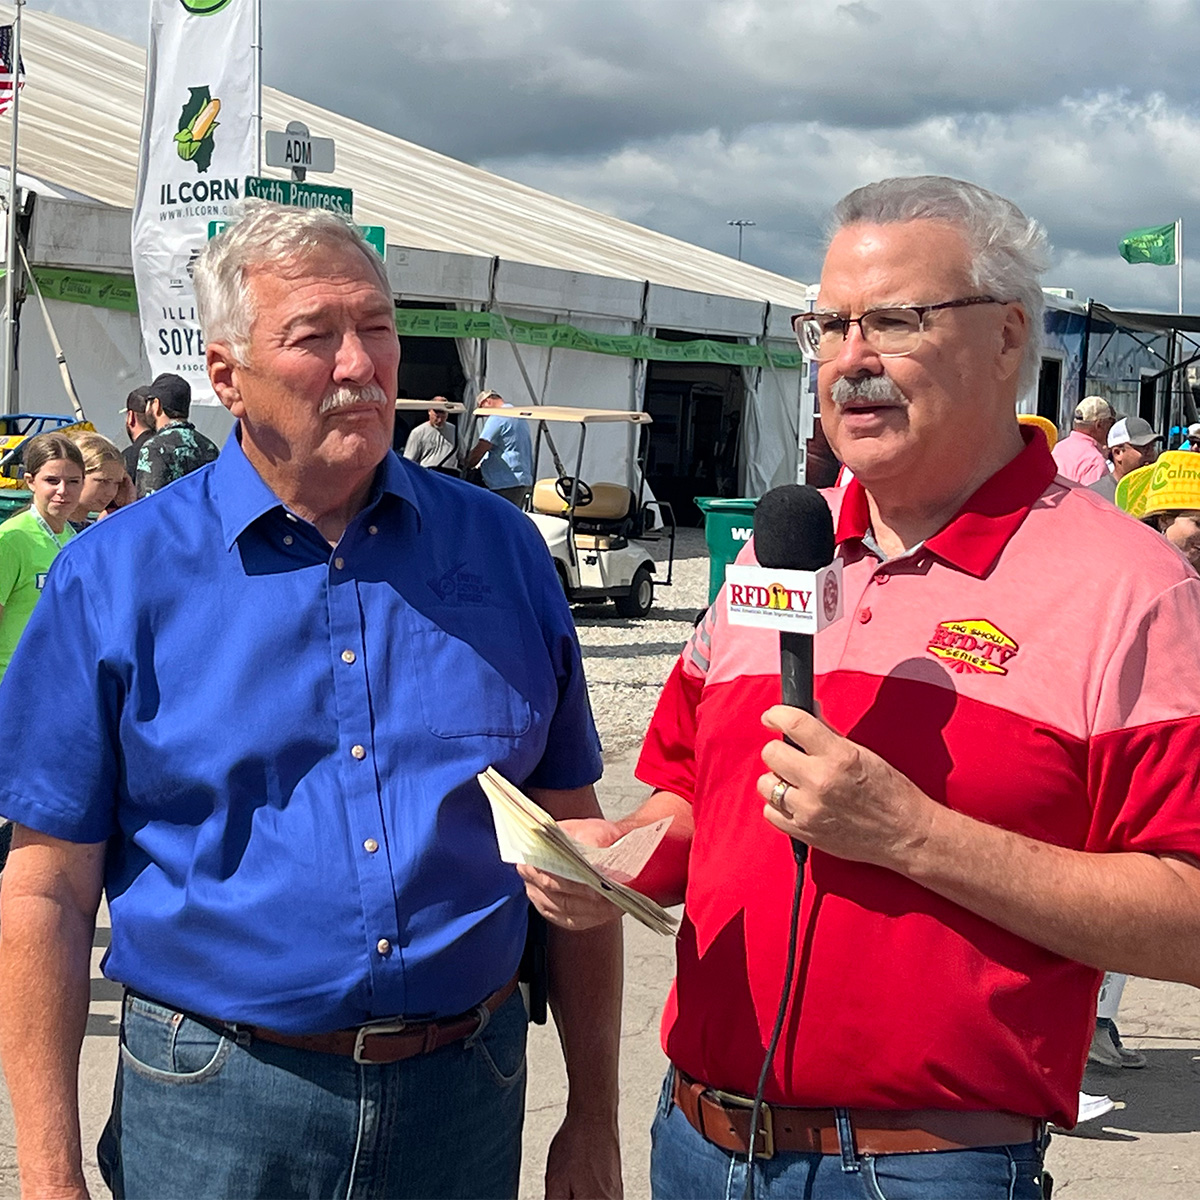 For 70 years, the @FPShow has connected farmers from around the globe with agriculture’s leading companies and spotlighted agriculture innovations. And this year was no different. Take a look. 👀 @maxarmstrong